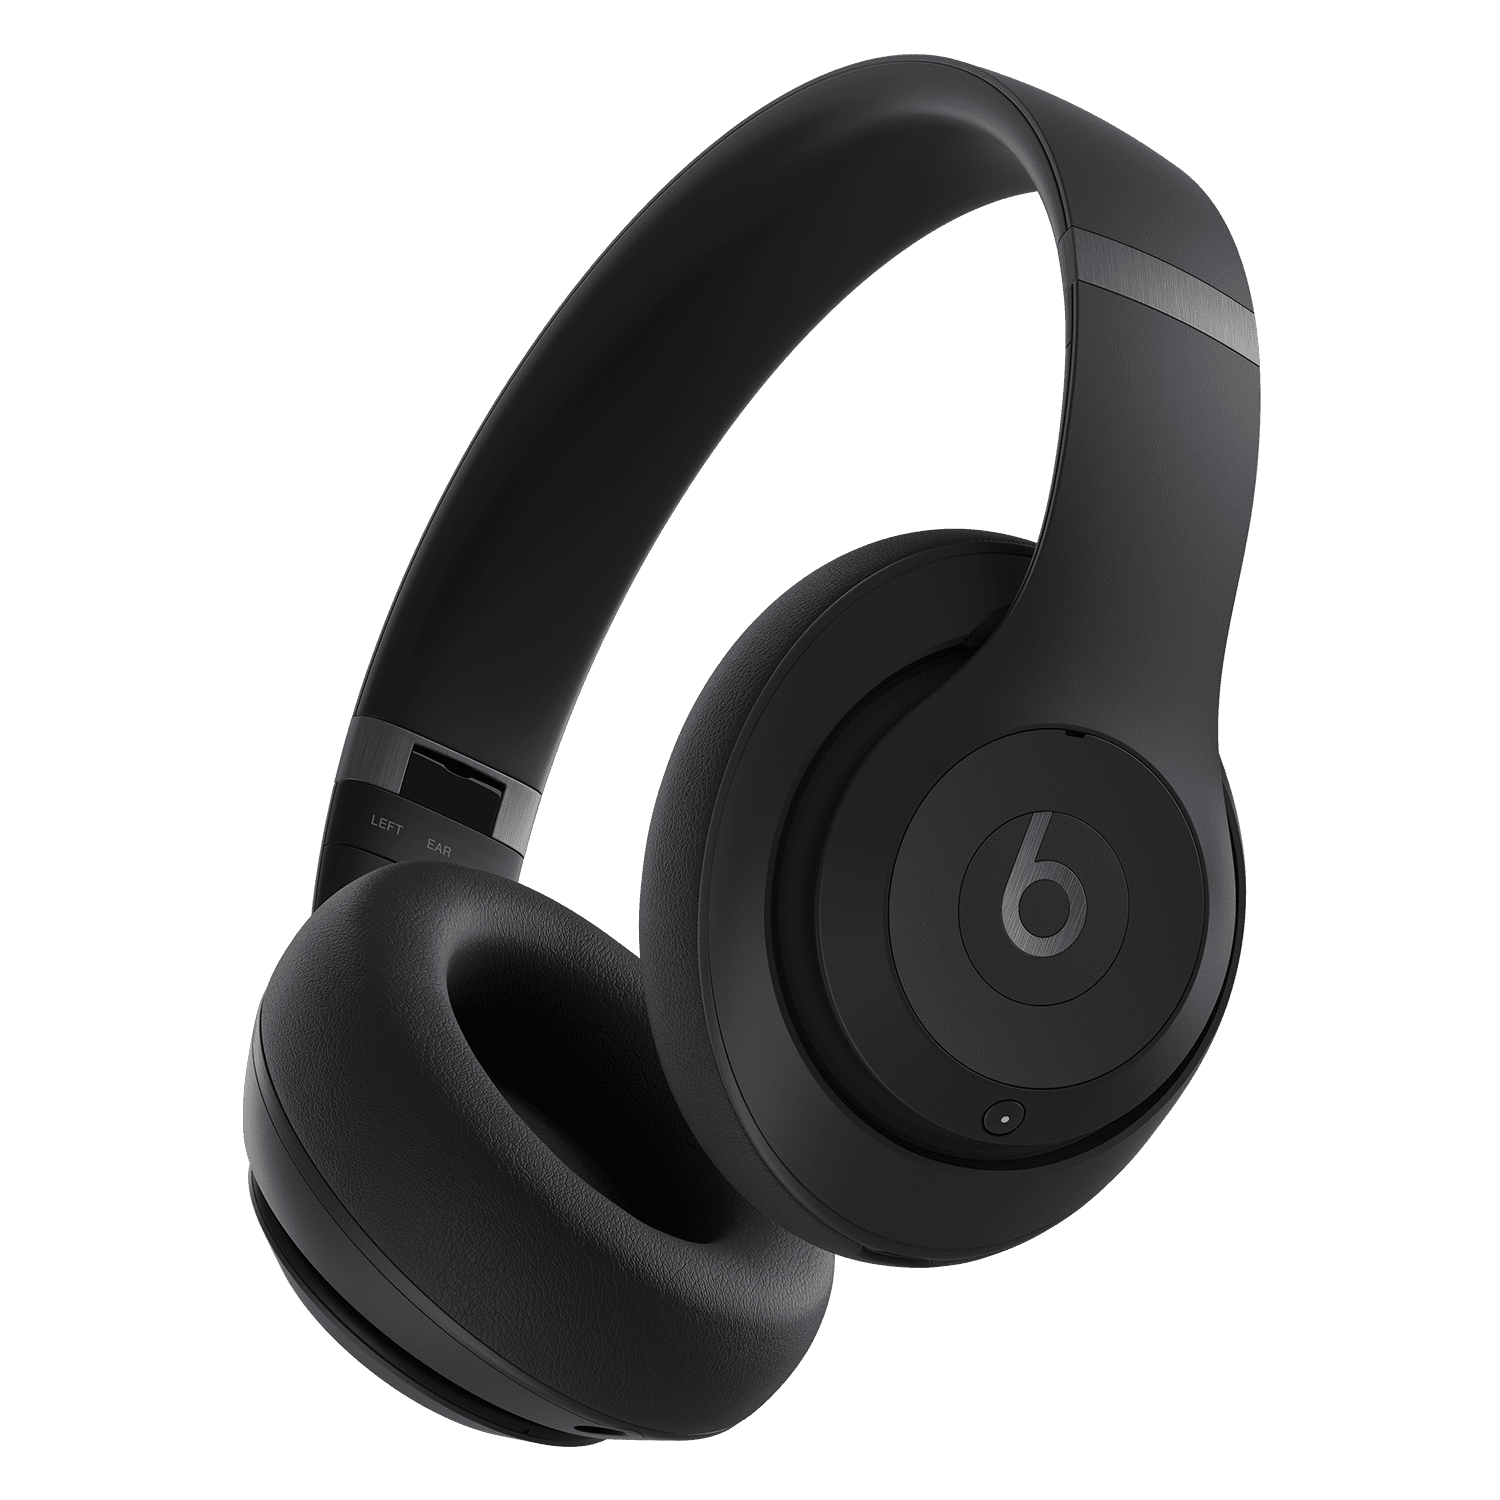 Costco Members: Beats Studio Pro Active Noise Cancelling Wireless Headphones w/ 2-Years of AppleCare+ $250 + Free Shipping